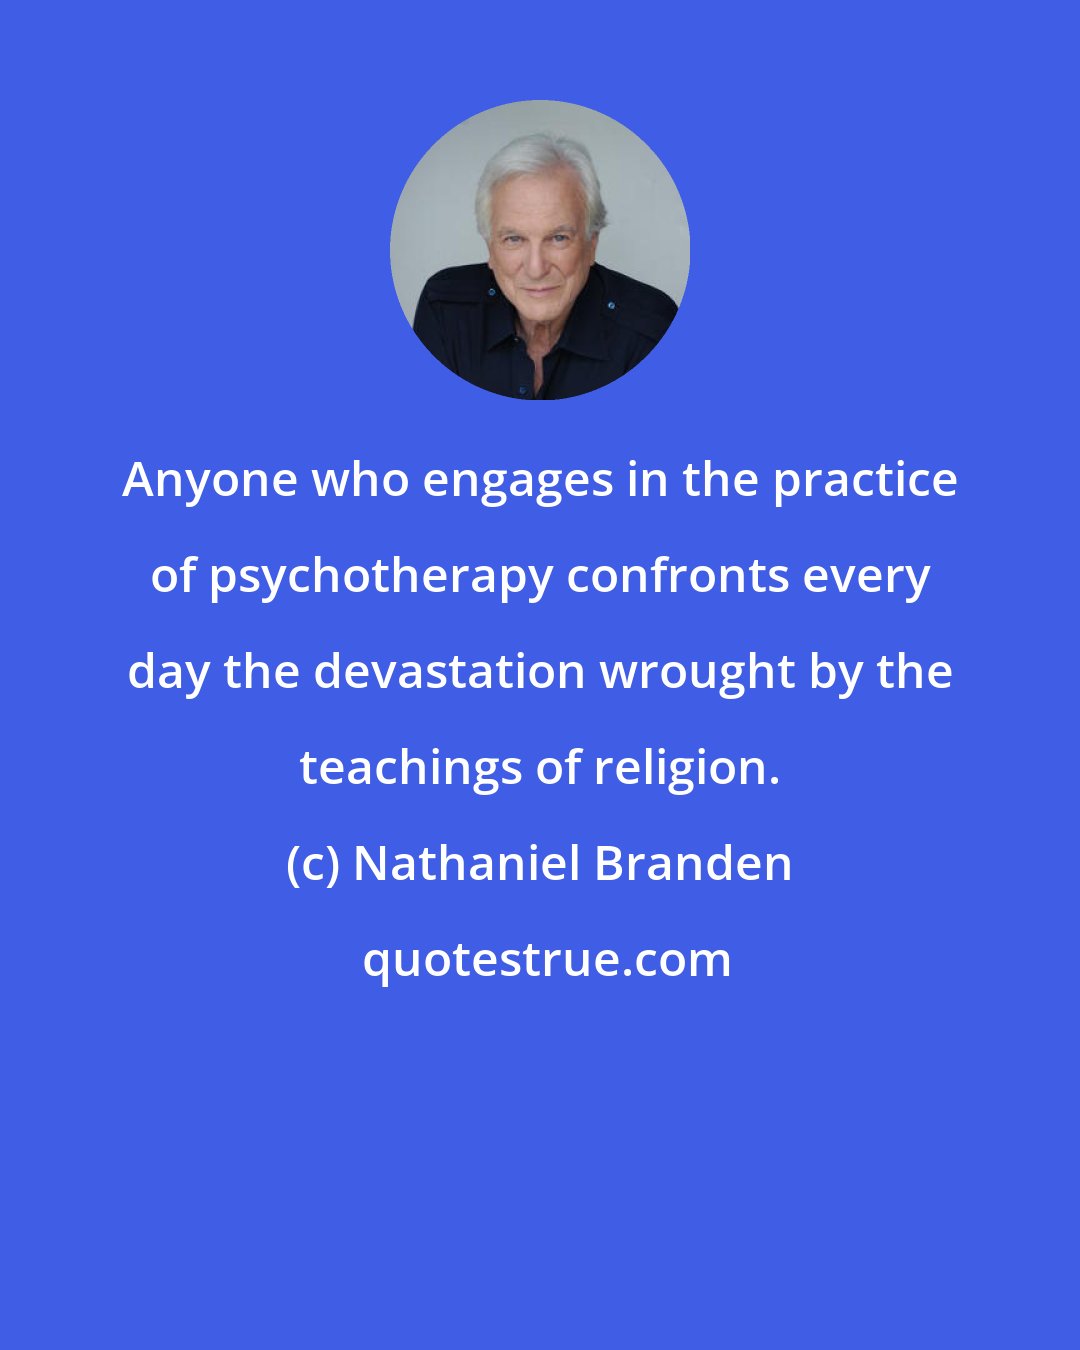 Nathaniel Branden: Anyone who engages in the practice of psychotherapy confronts every day the devastation wrought by the teachings of religion.